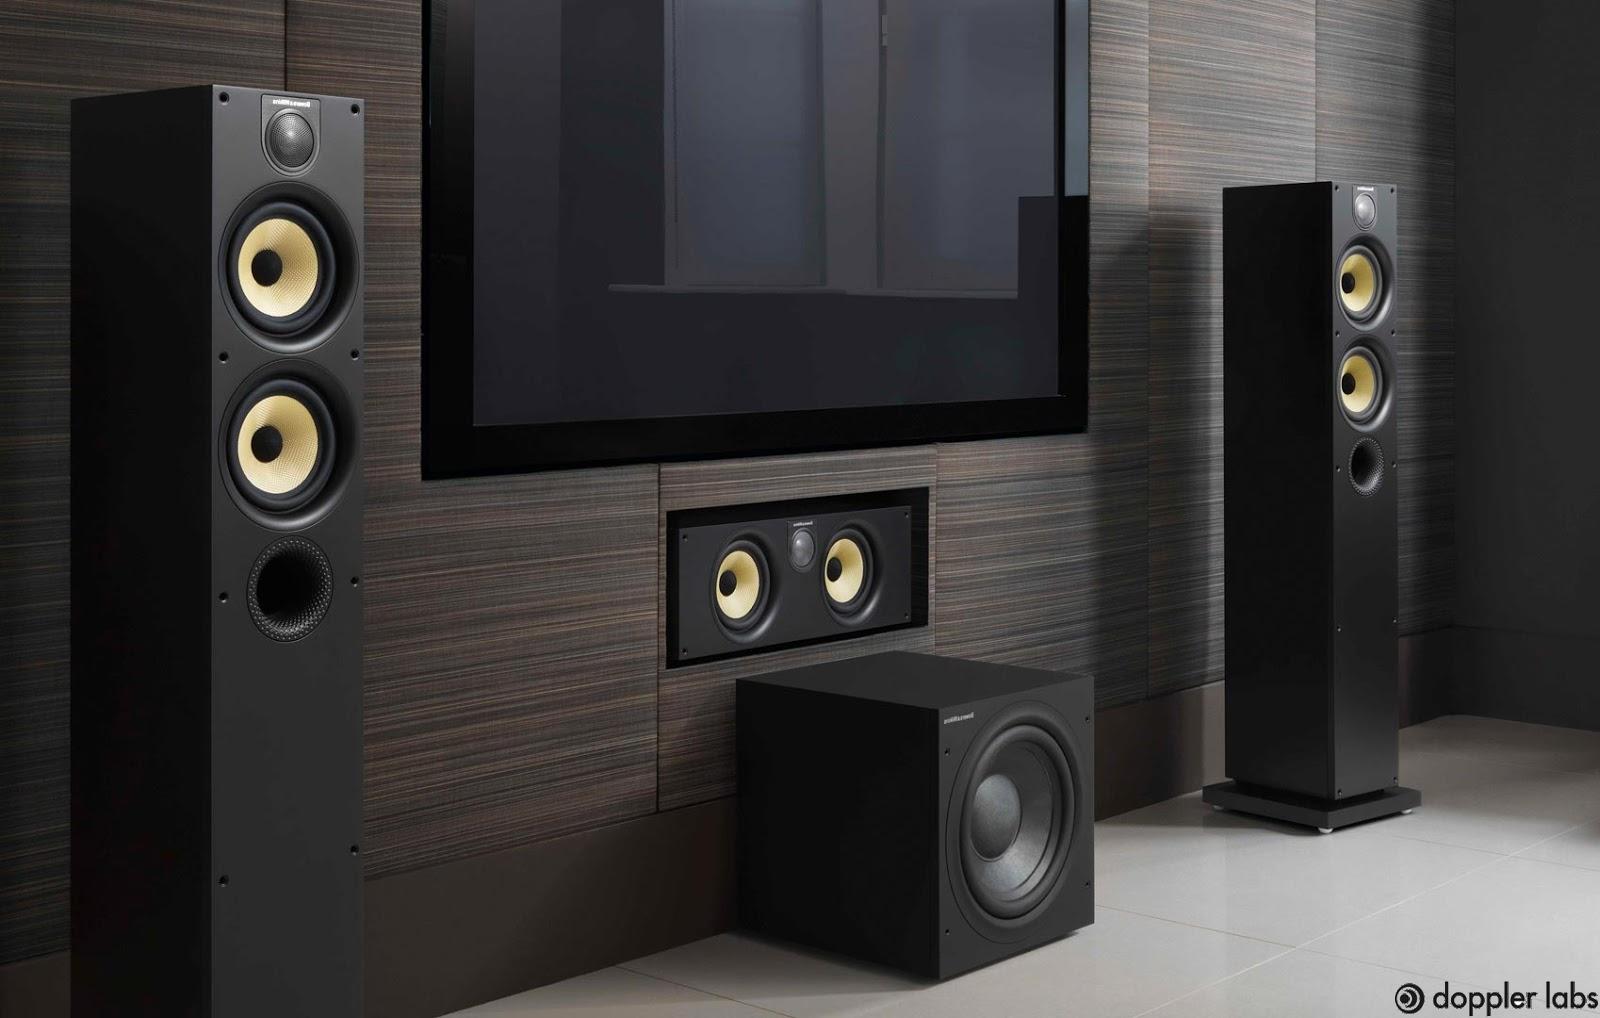 A modern home audio system